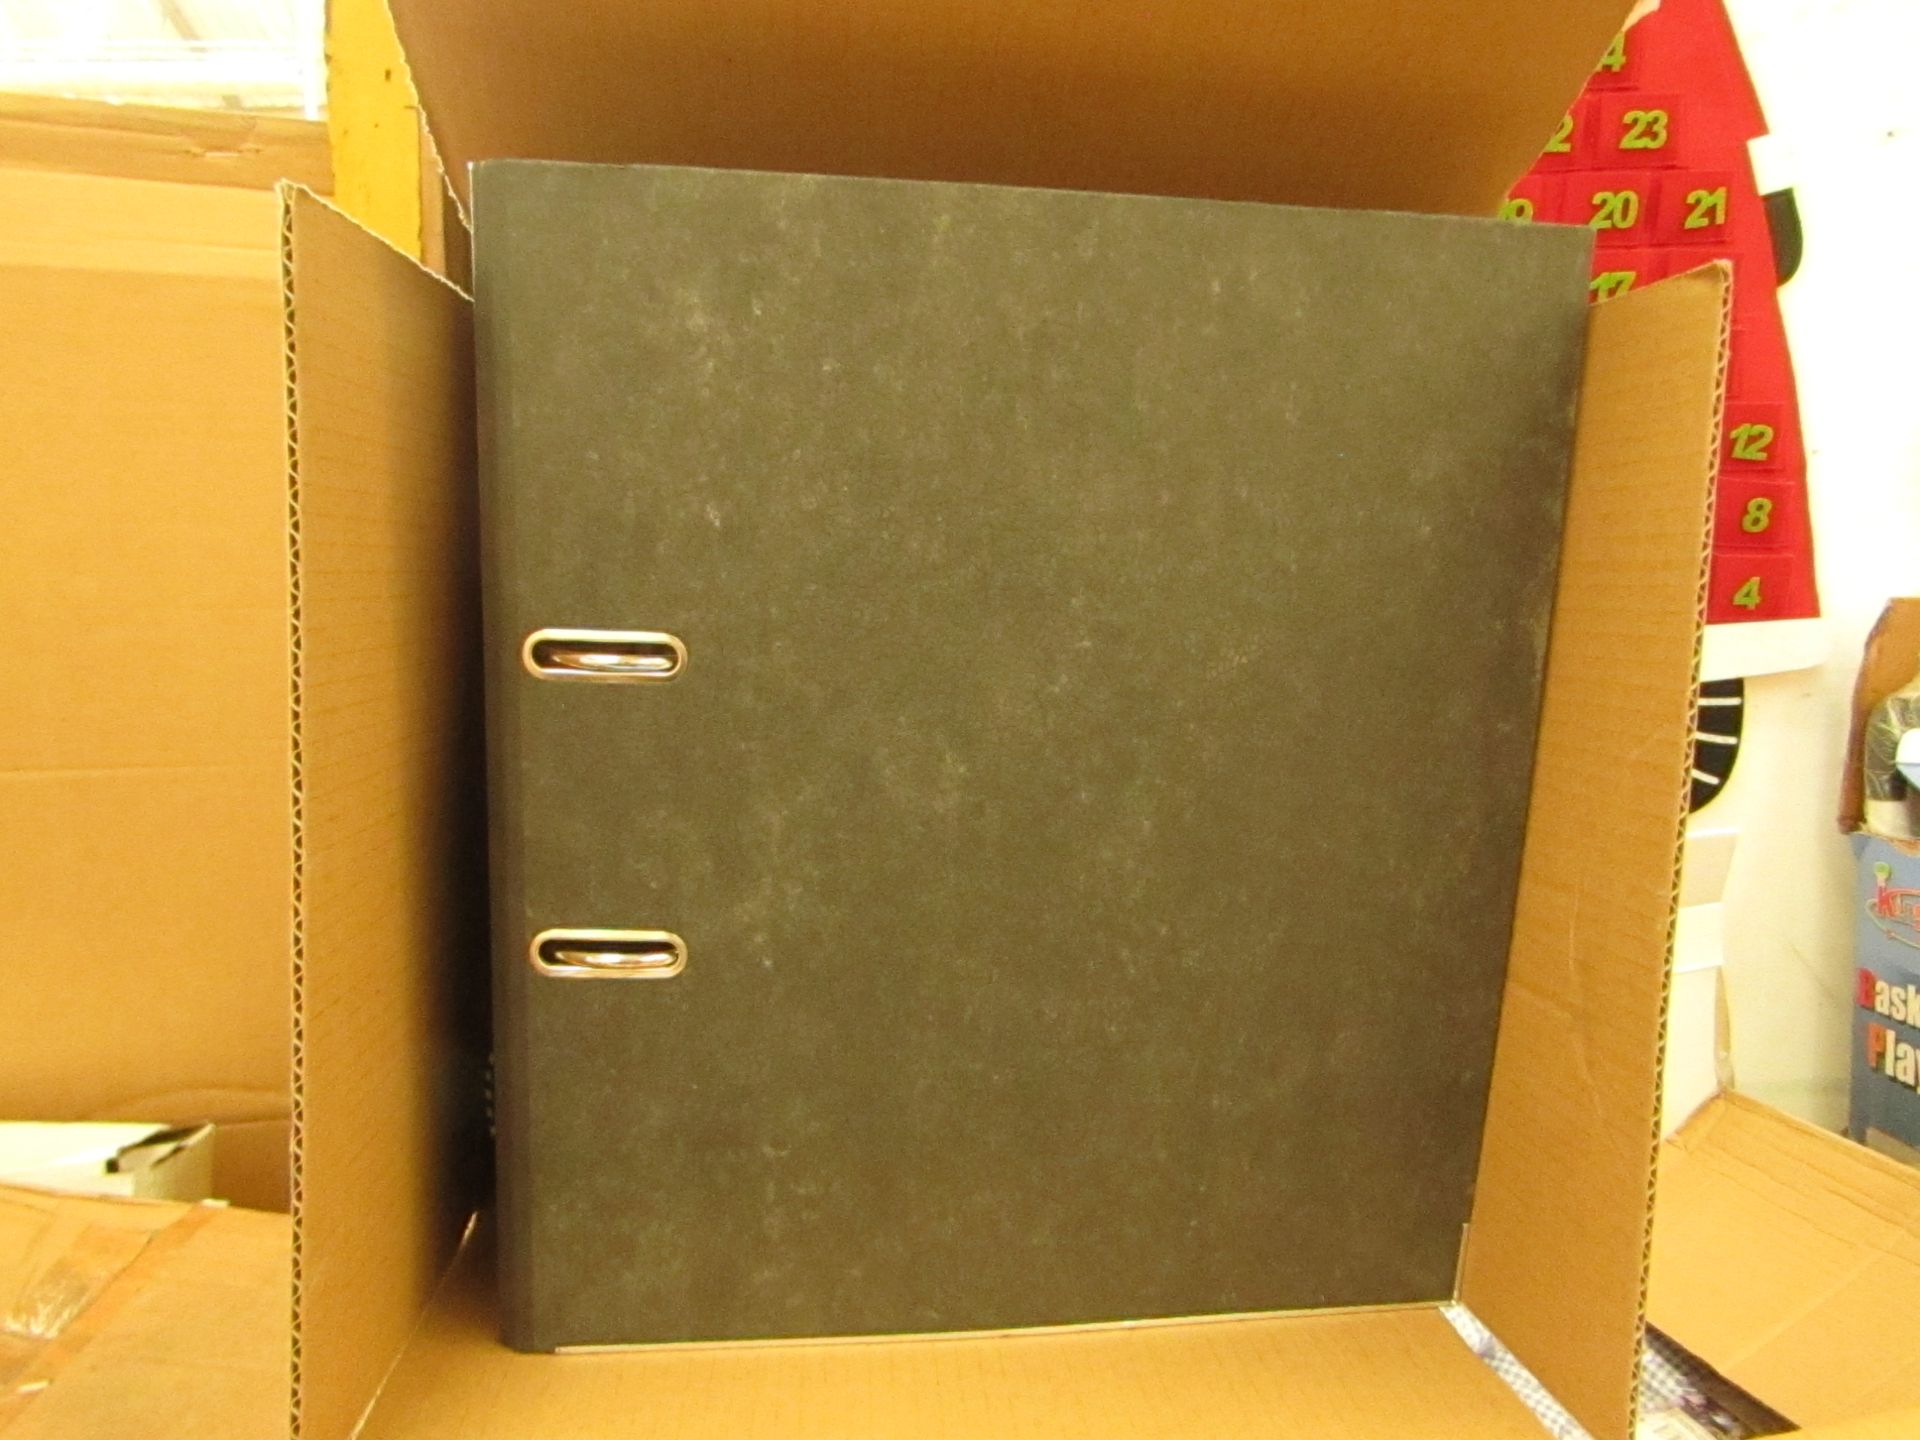 1x Box Containing 6x Arch 2-Hole Binder Files - Unused & Boxed.